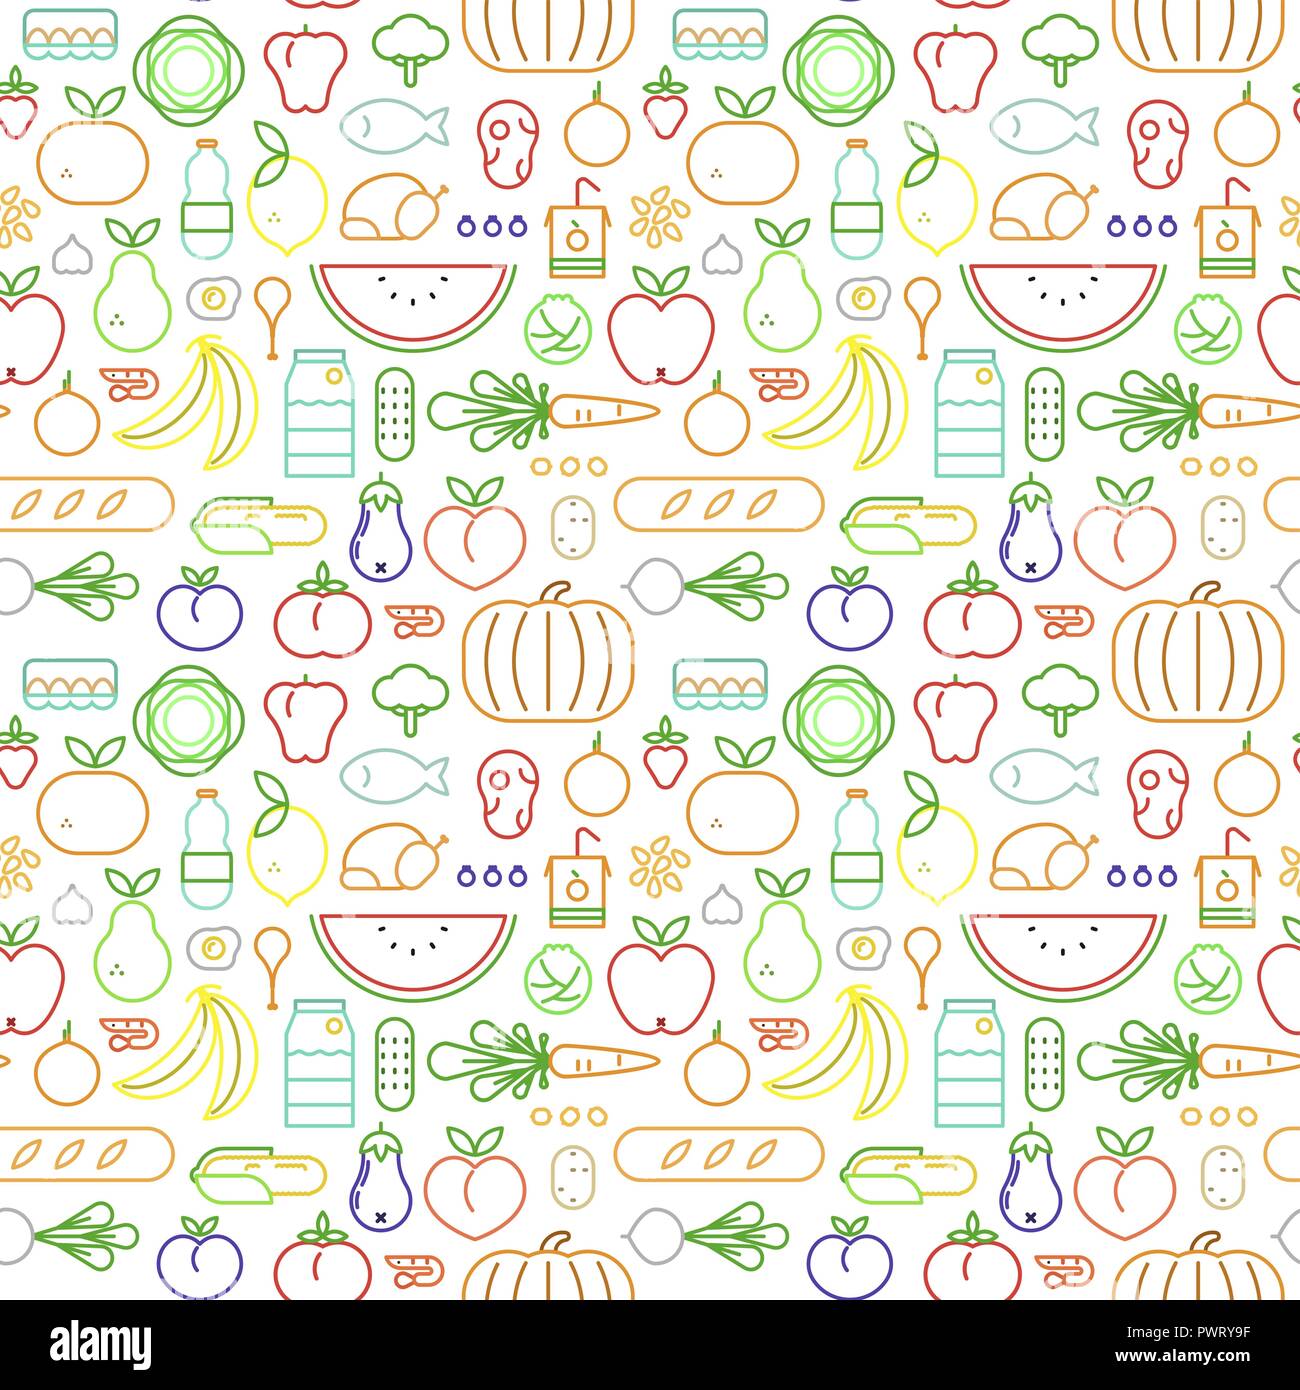 Food icon seamless pattern with colorful outline style symbols. Healthy eating or balanced nutrition concept background. Includes fruit, vegetables, m Stock Vector